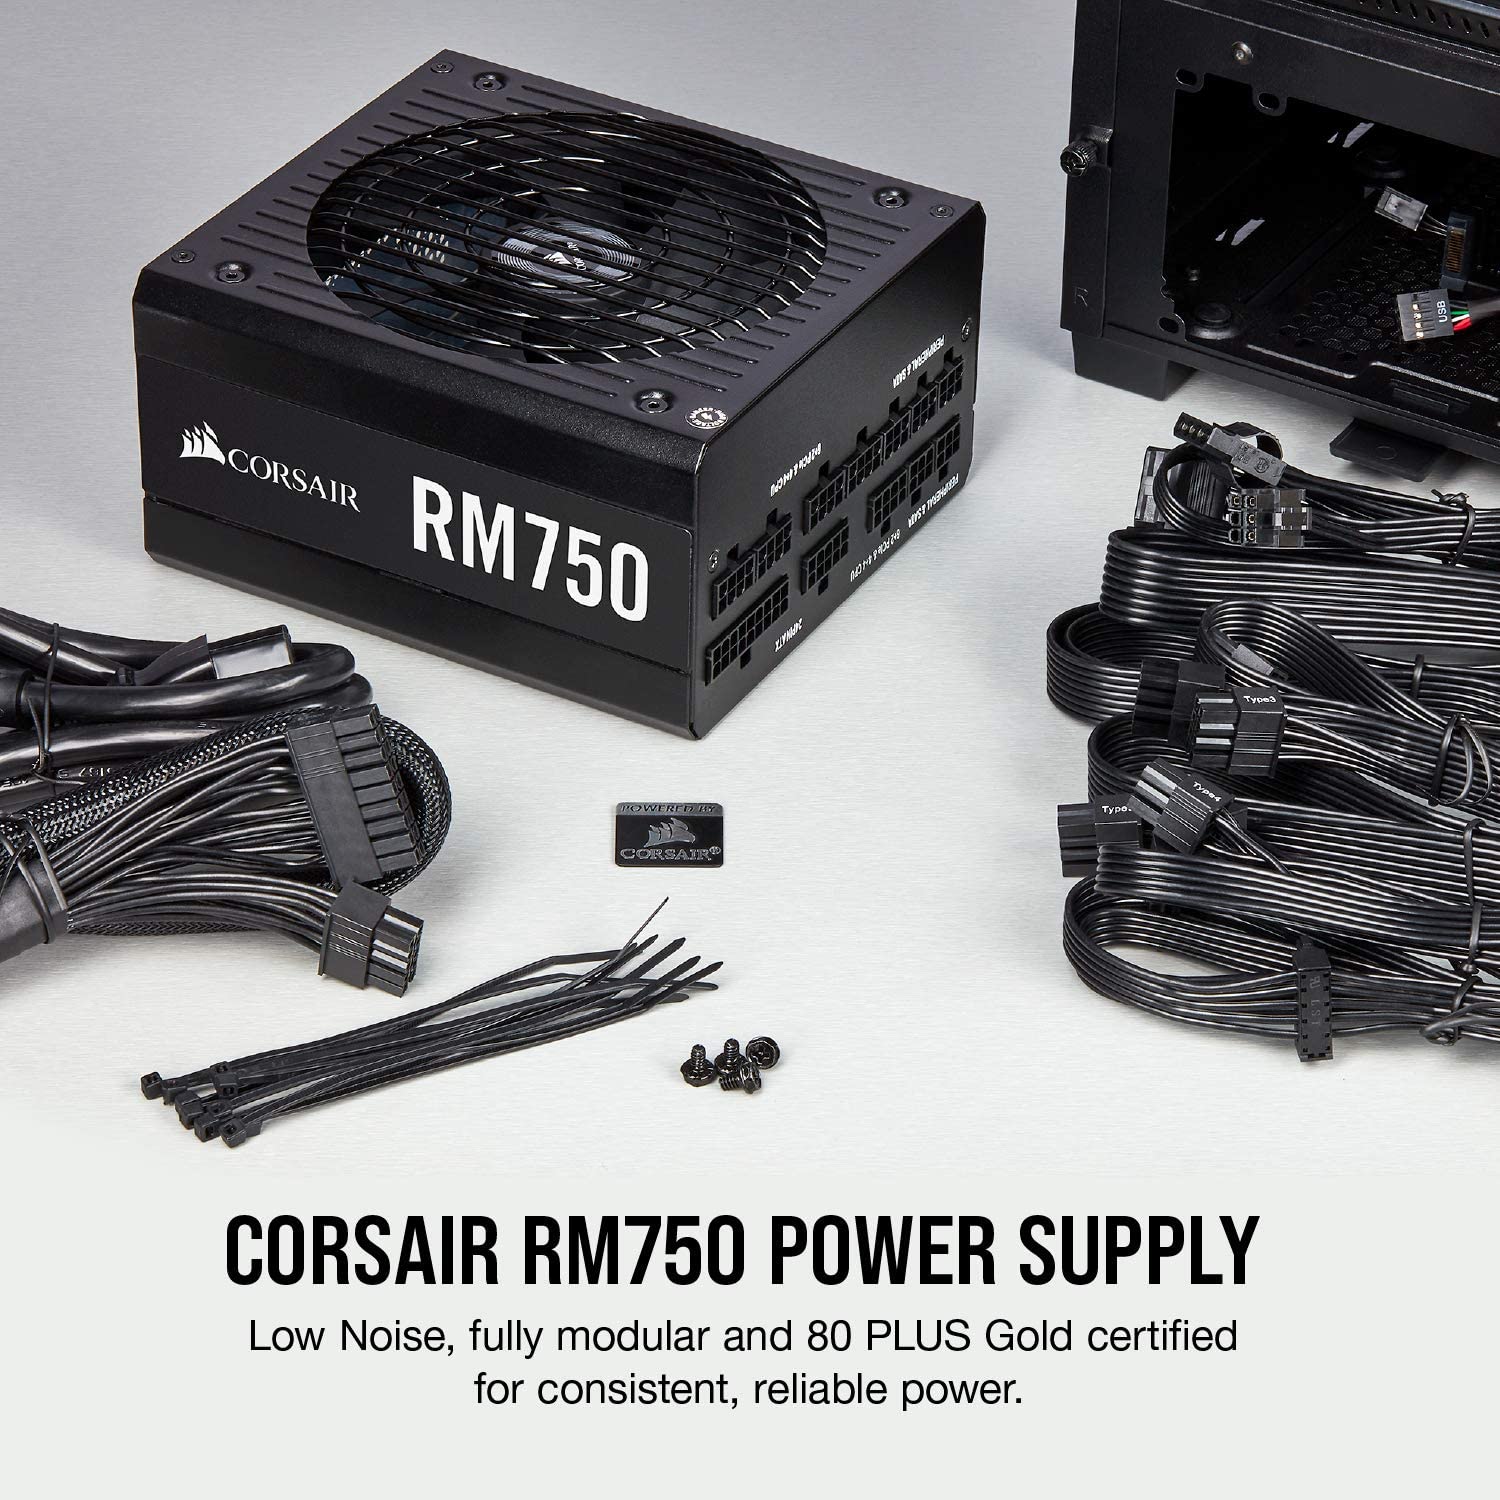 RMe Series RM750e Fully Modular Low-Noise ATX Power Supply